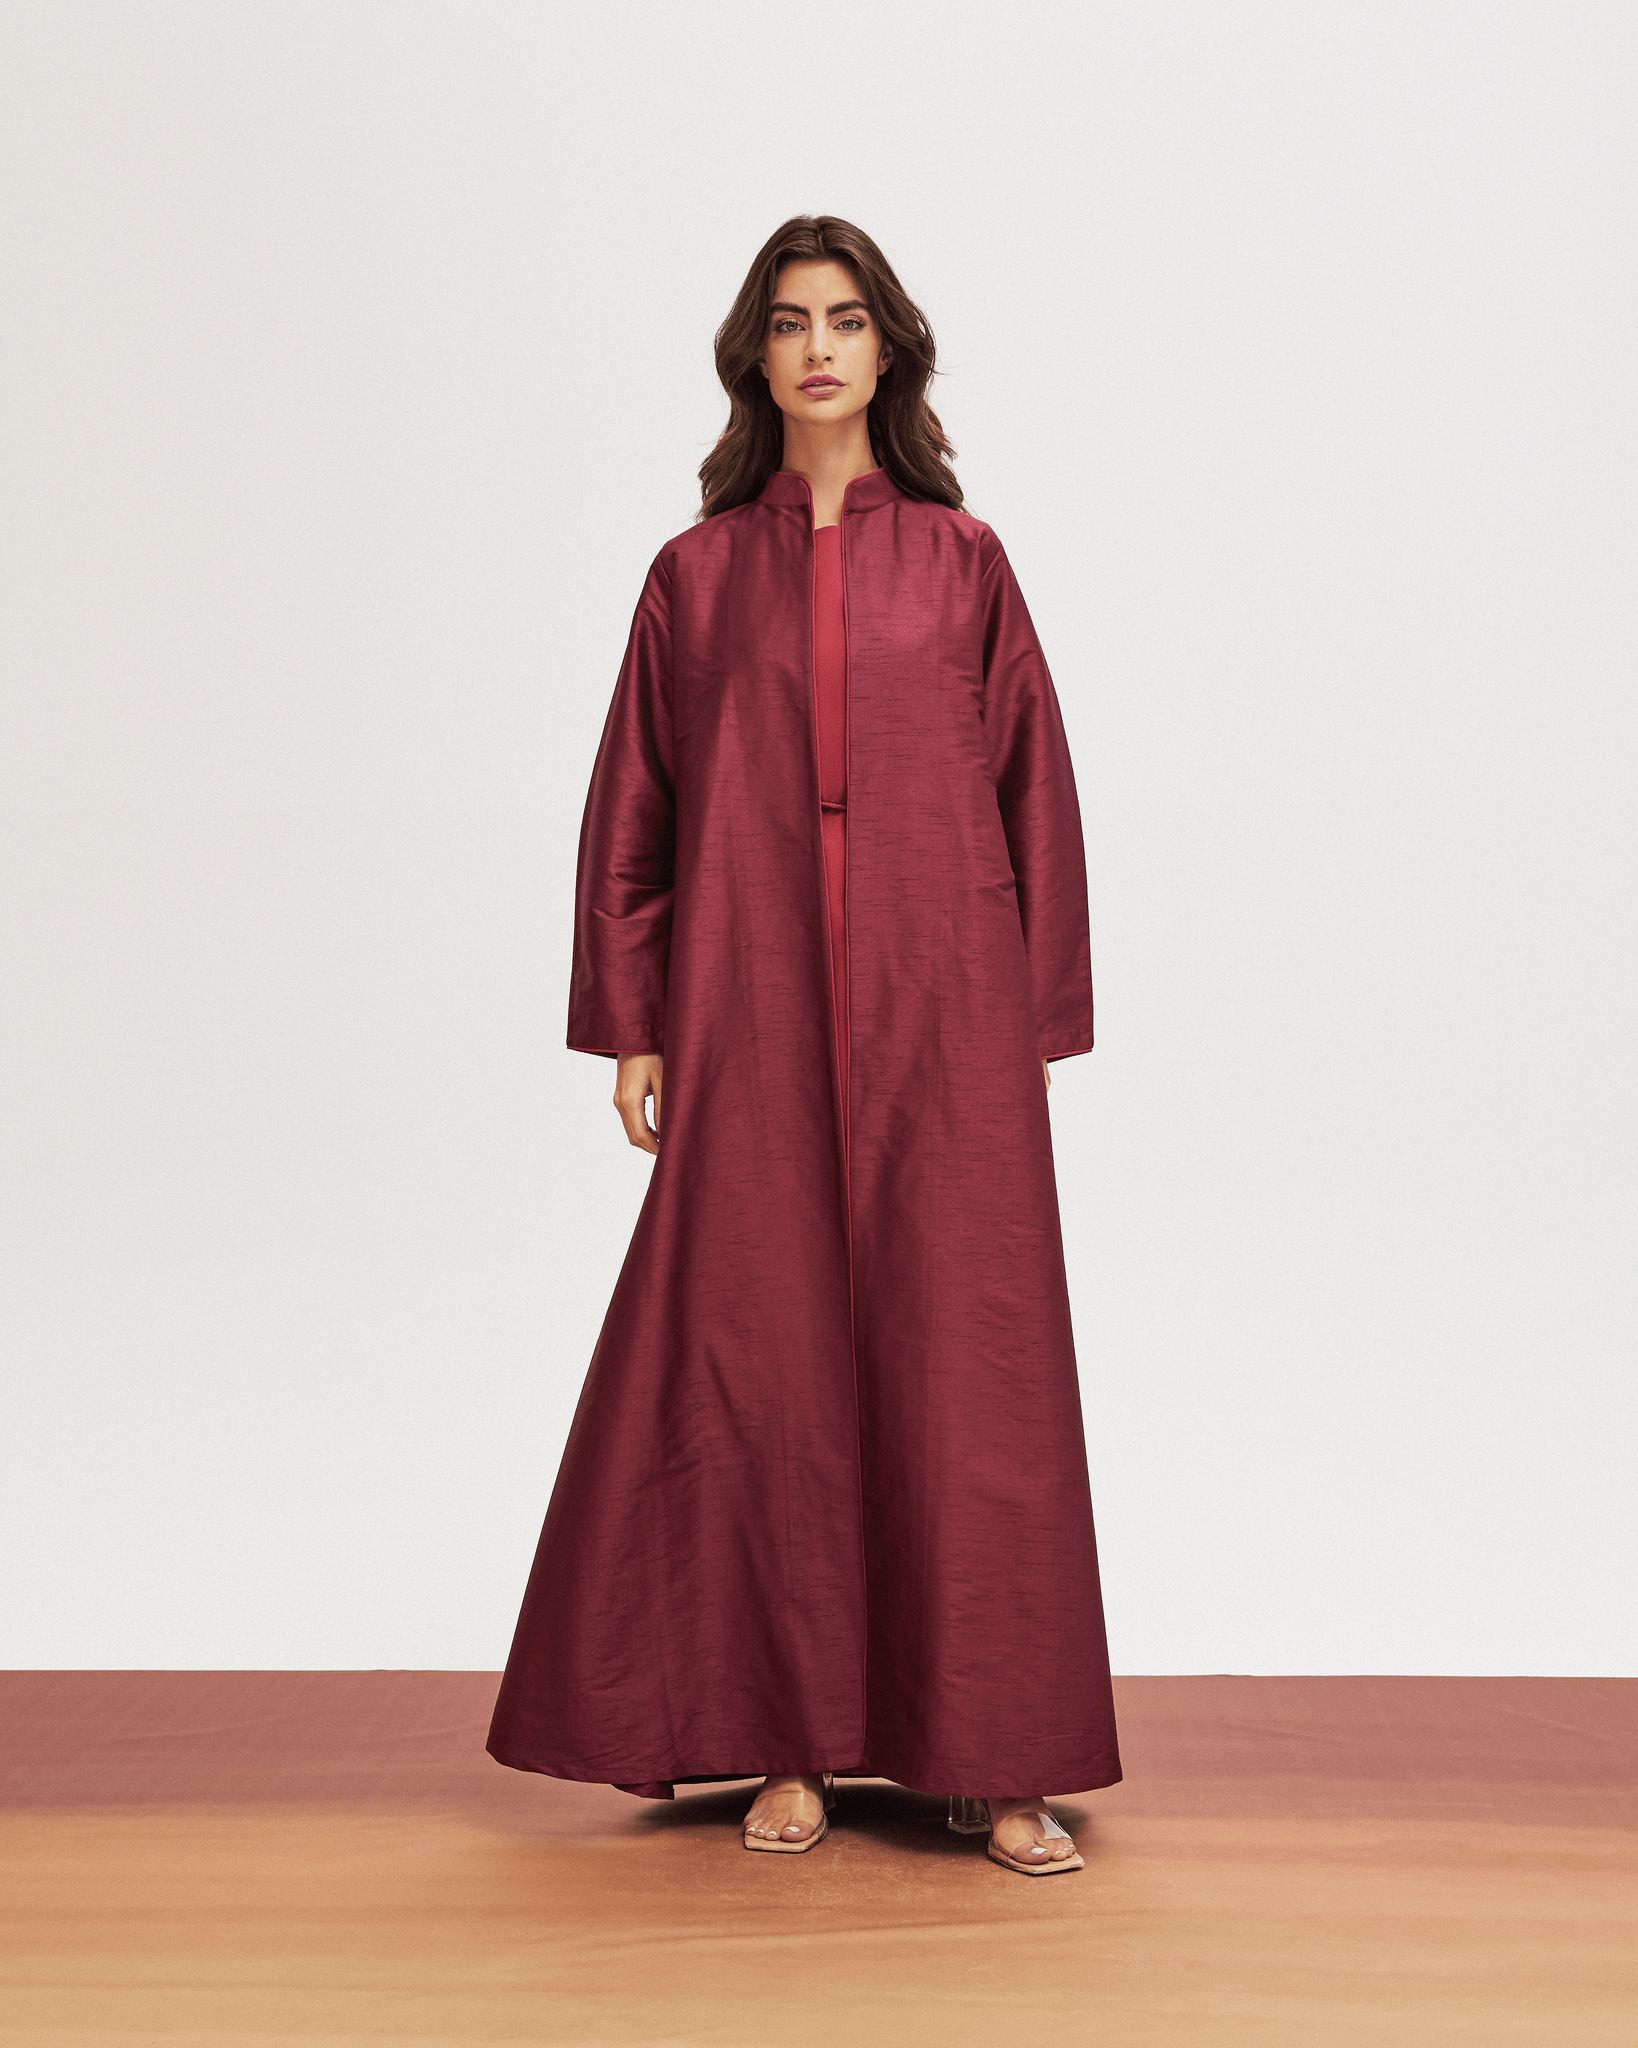 RED PLAIN RAW SILK ABAYA WITH CREPE INNER DRESS AND EMBROIDERED BELT